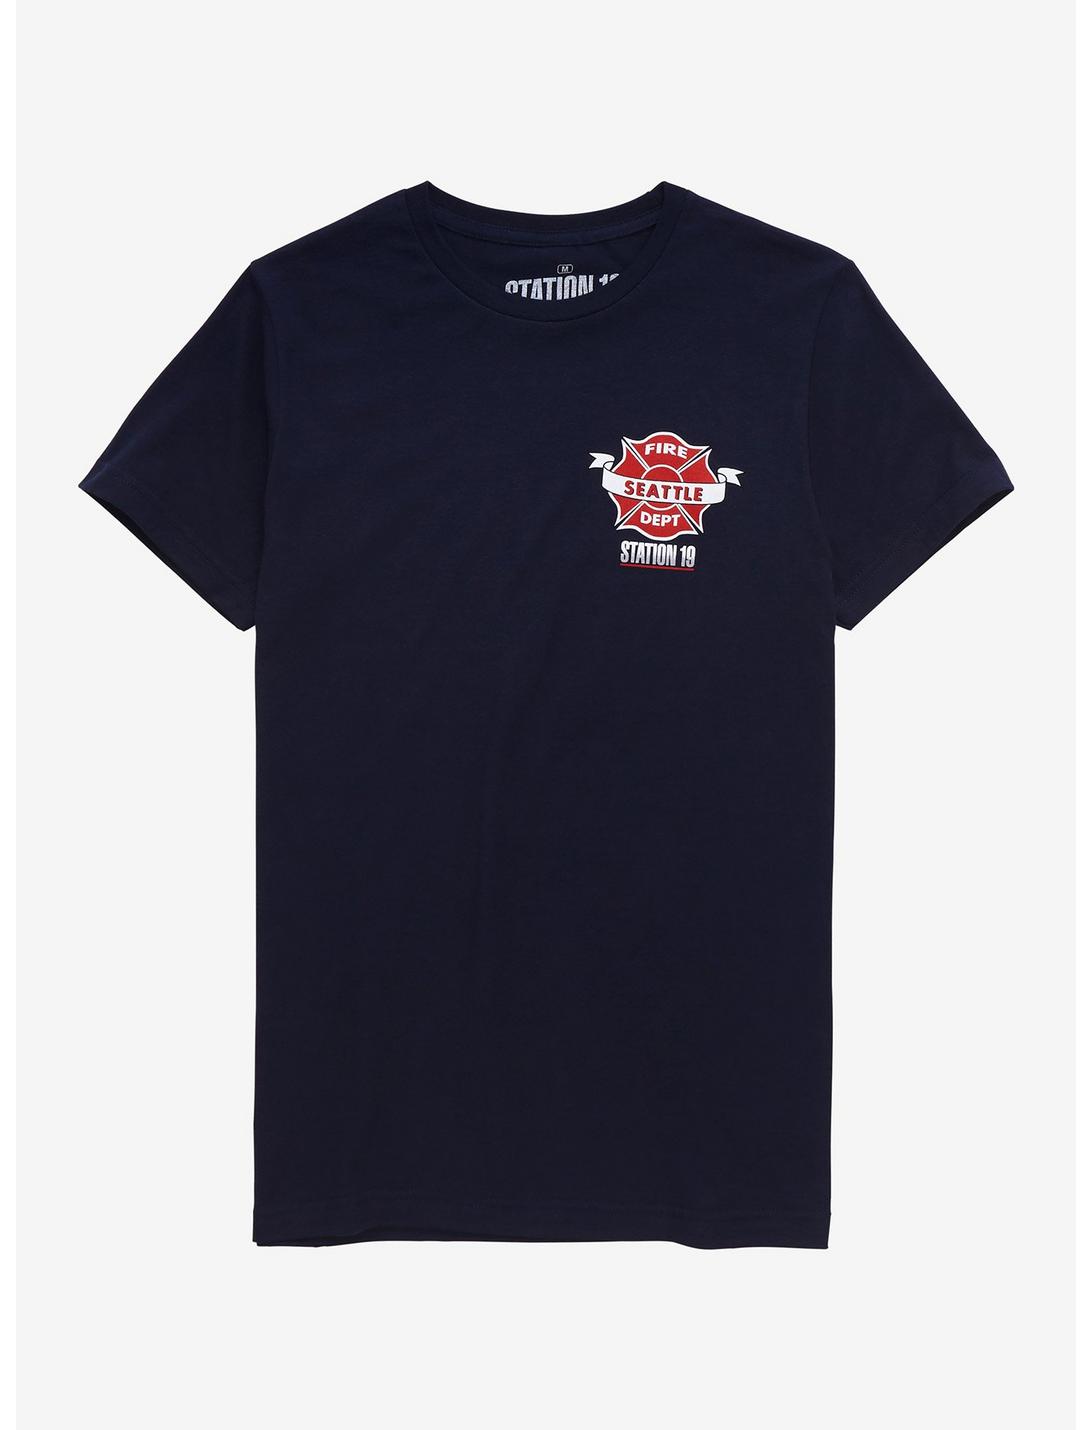 Station 19 Fire Department Logo Women's T-Shirt - BoxLunch Exclusive, BLACK, hi-res